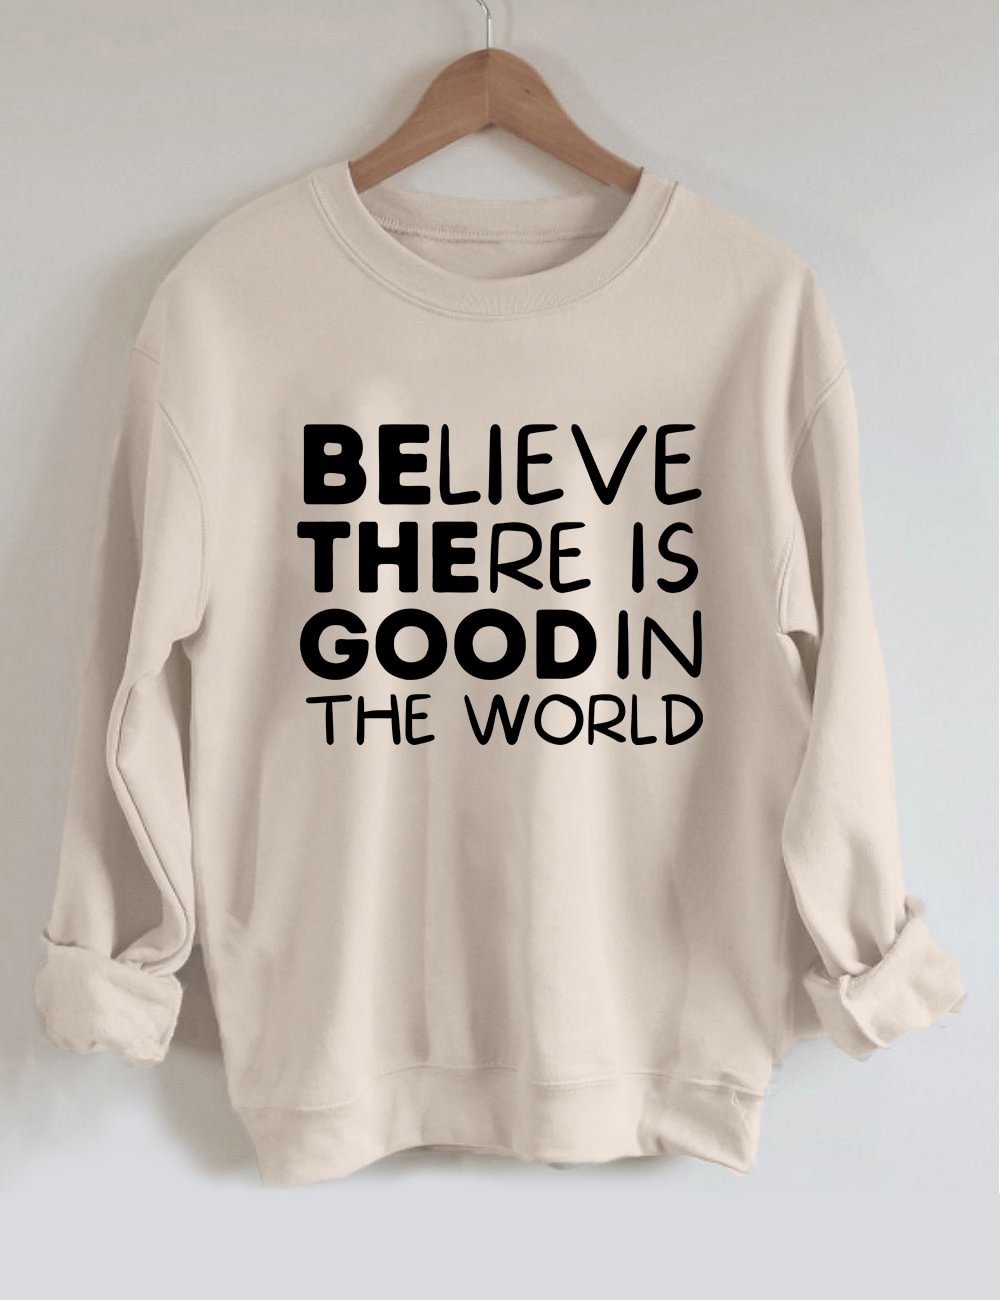 Believe There is Good in the World Sweatshirt